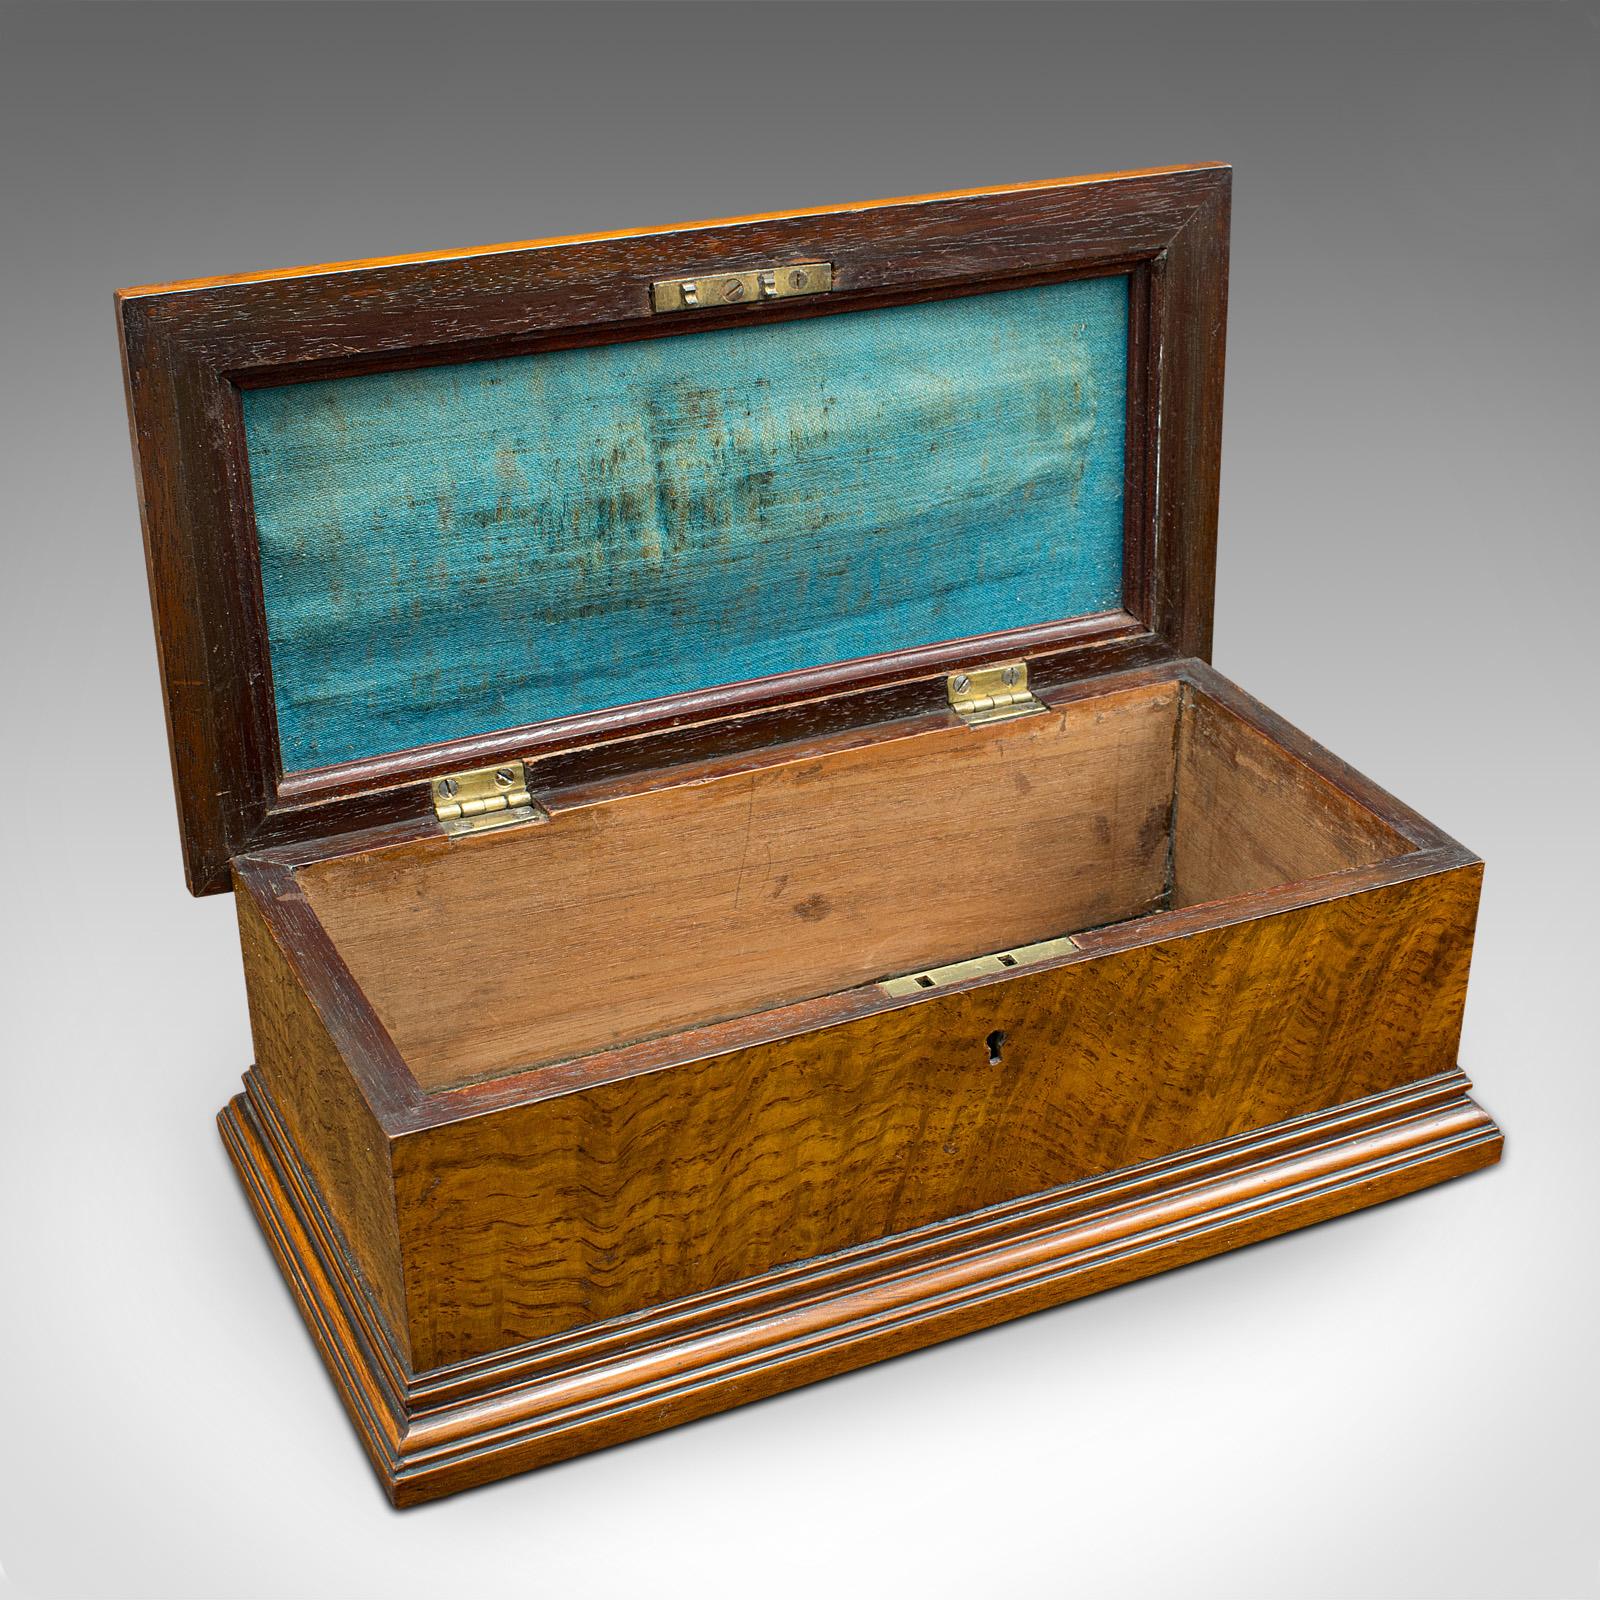 This is an antique gentleman's glove box. An English, walnut sarcophagus shaped keepsake or card case, dating to the mid Victorian period, circa 1870.

Delightful craftsmanship, ideal for the reception hall side cabinet or dresser
Displays a